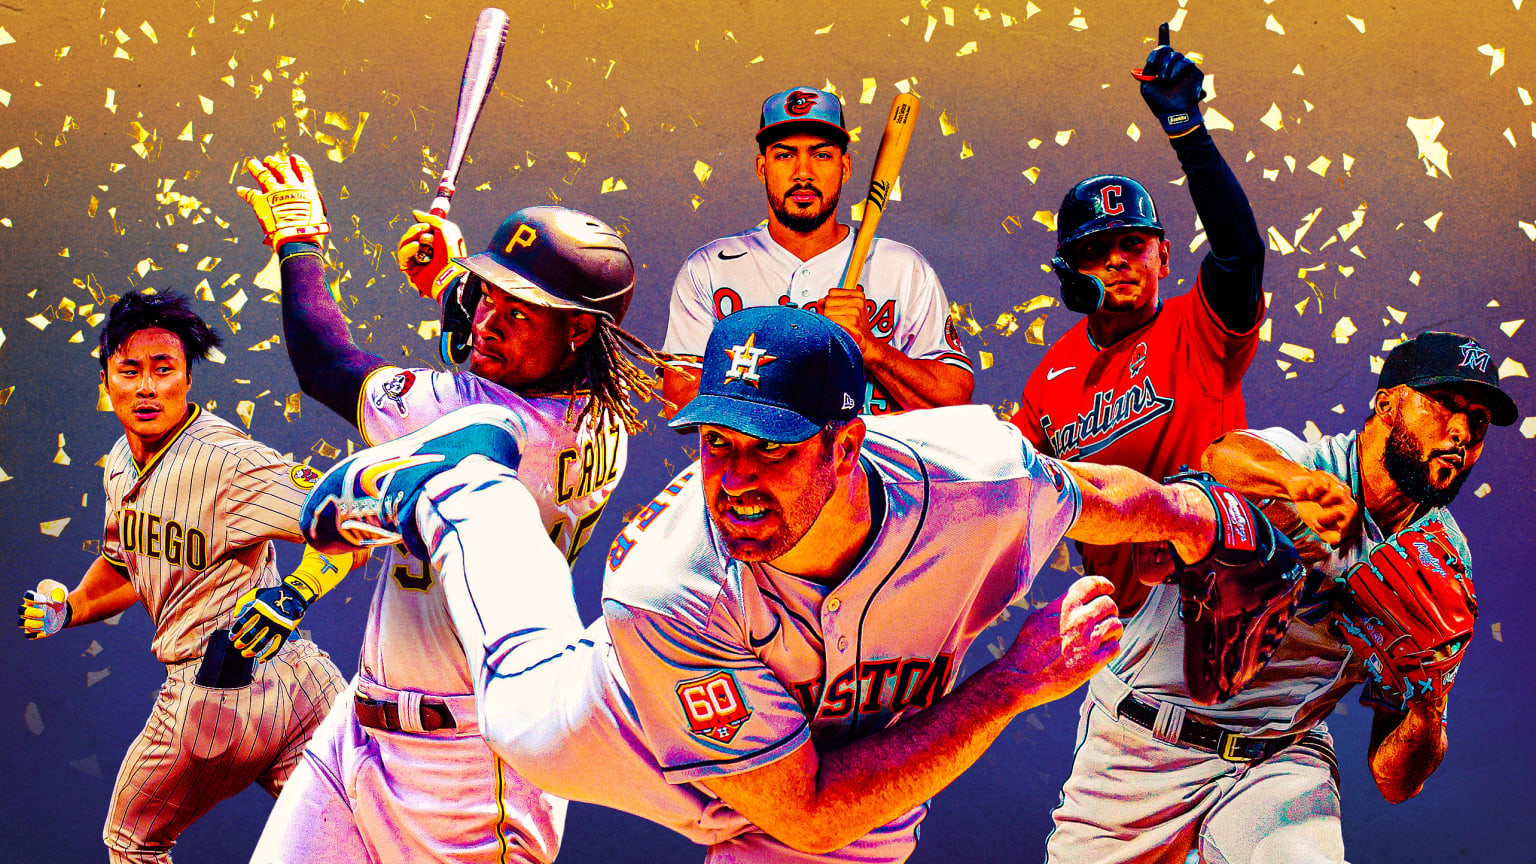 A composite image of 6 players performing various baseball activities amidst gold confetti